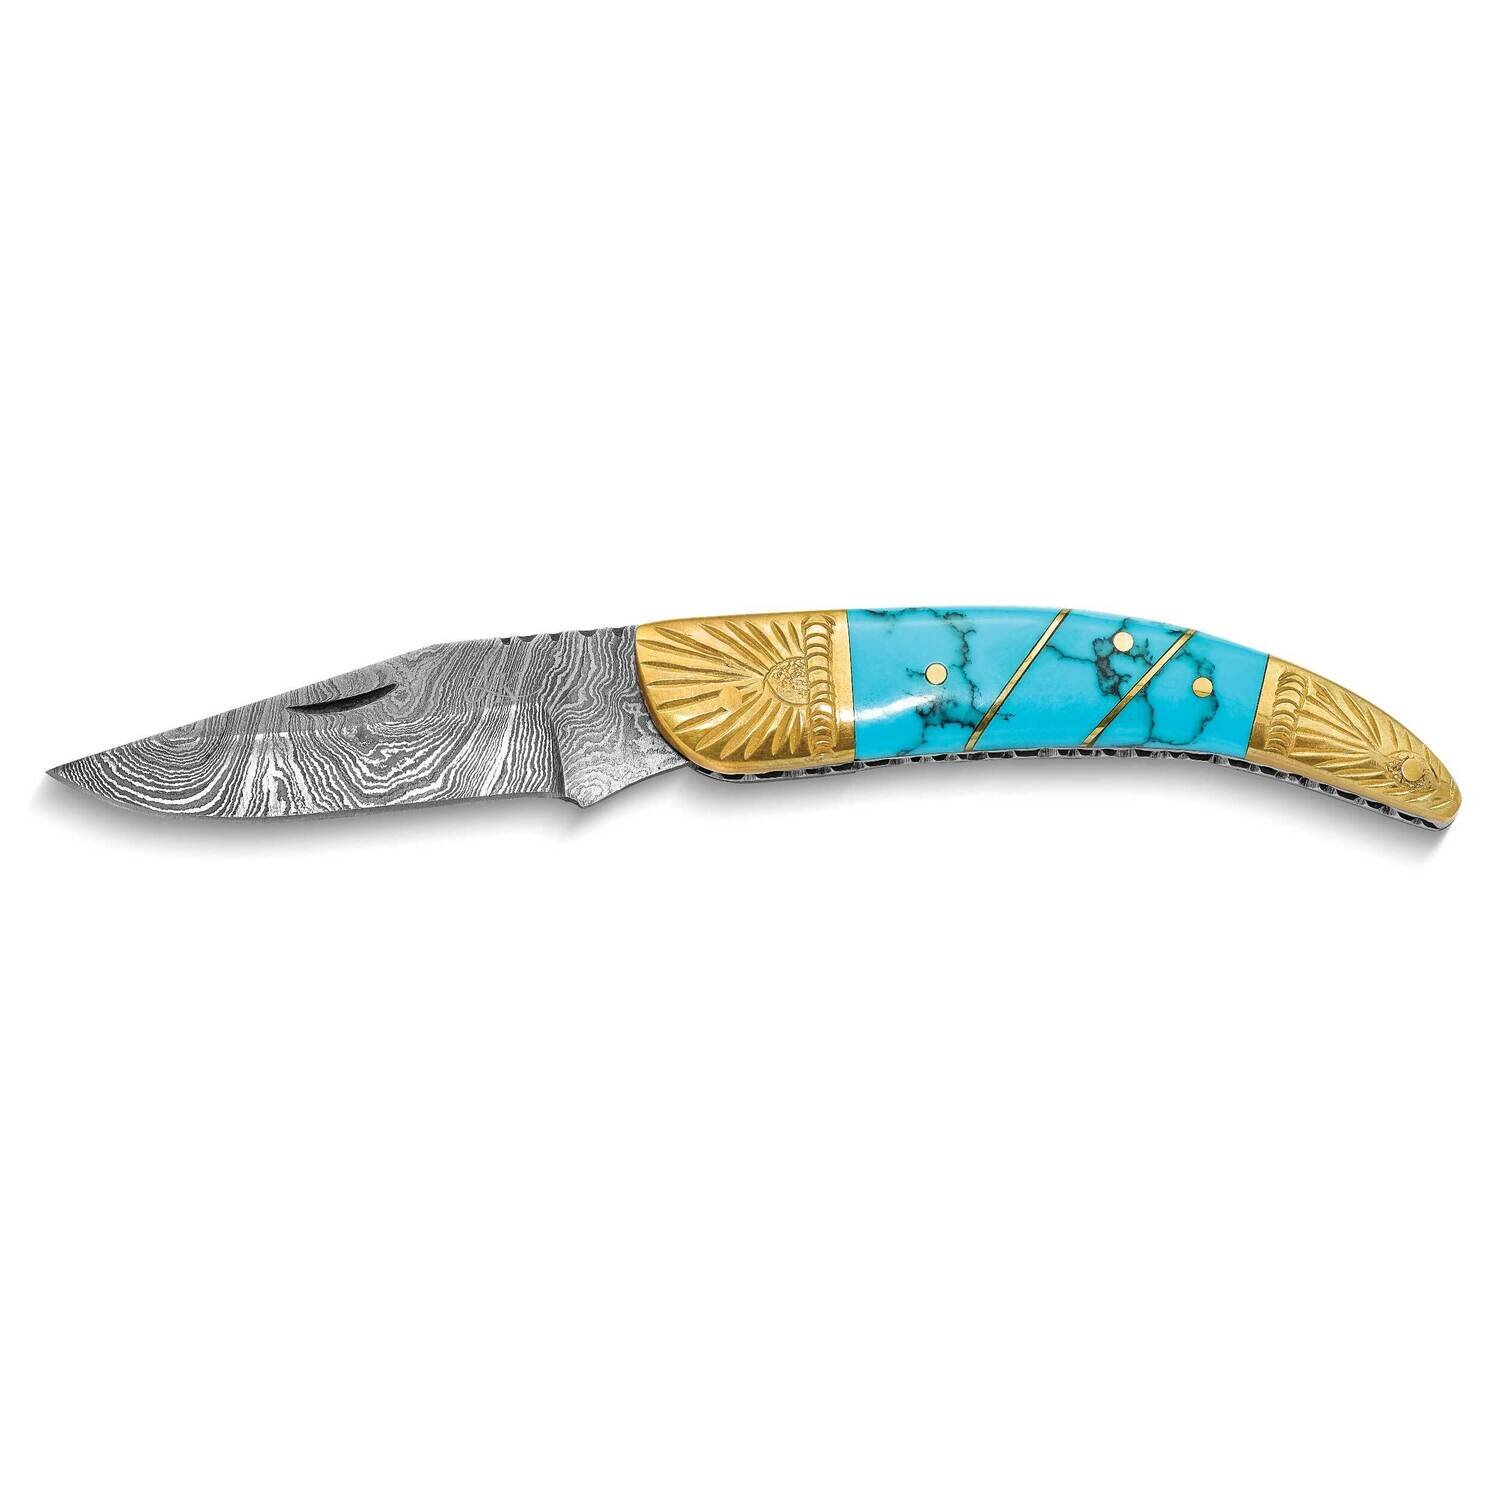 By Jere Folding Blade Compressed Turquoise and Stone Handle Knife with Leather Sheath and Wooden Gift Box Damascus Steel 256 Layer KN3270